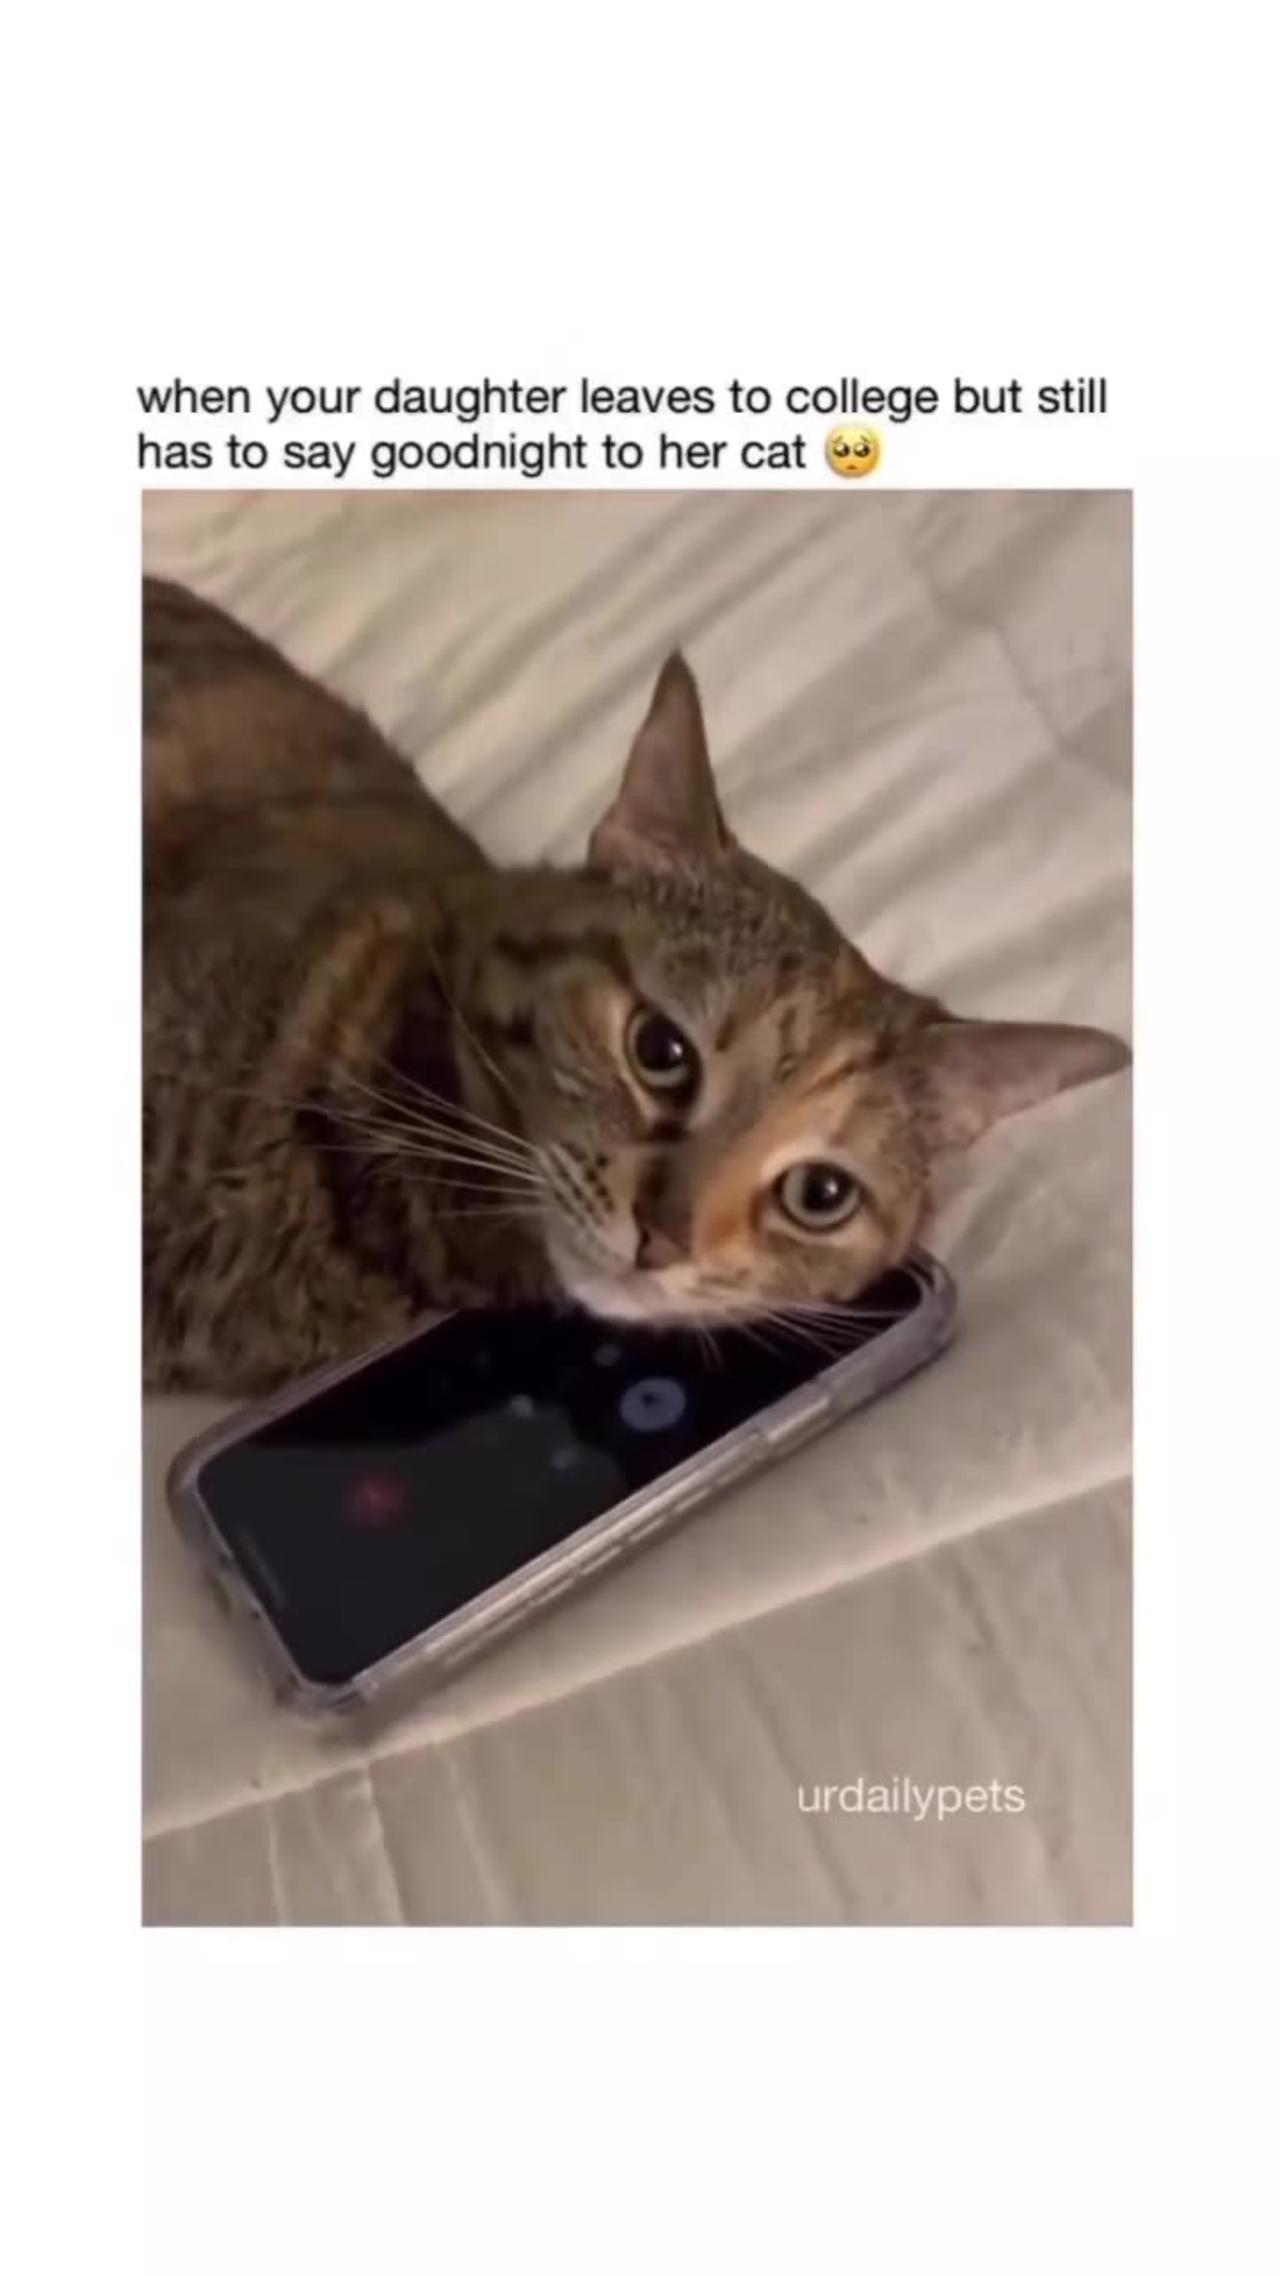 My cat is phone addicted any one can help me